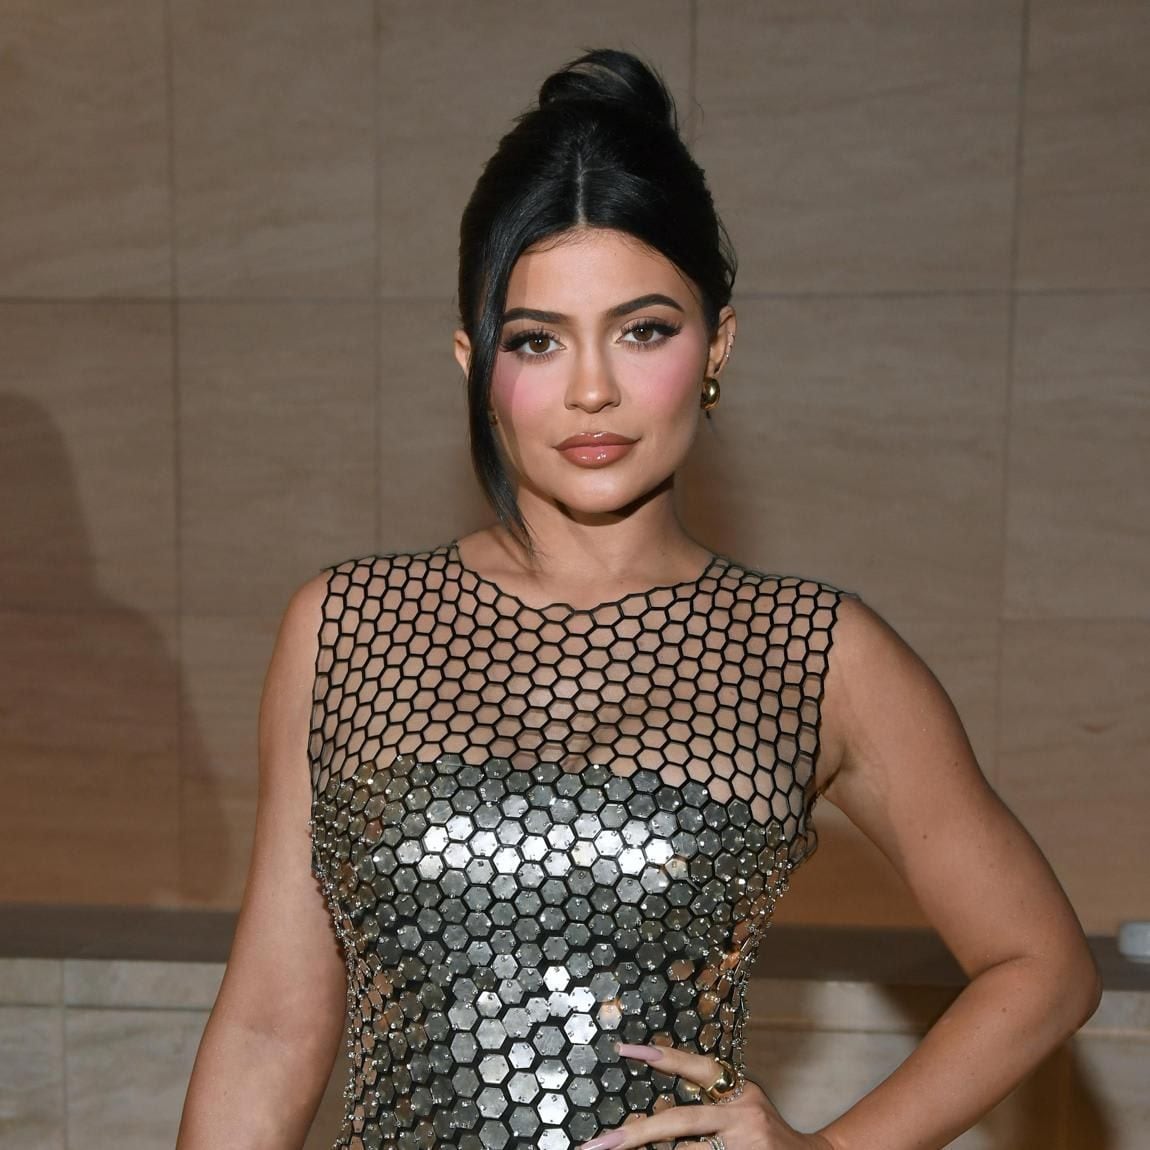 Kylie Jenner wearing an up-do with a loose strand on one side, rocking a silver dress with black details